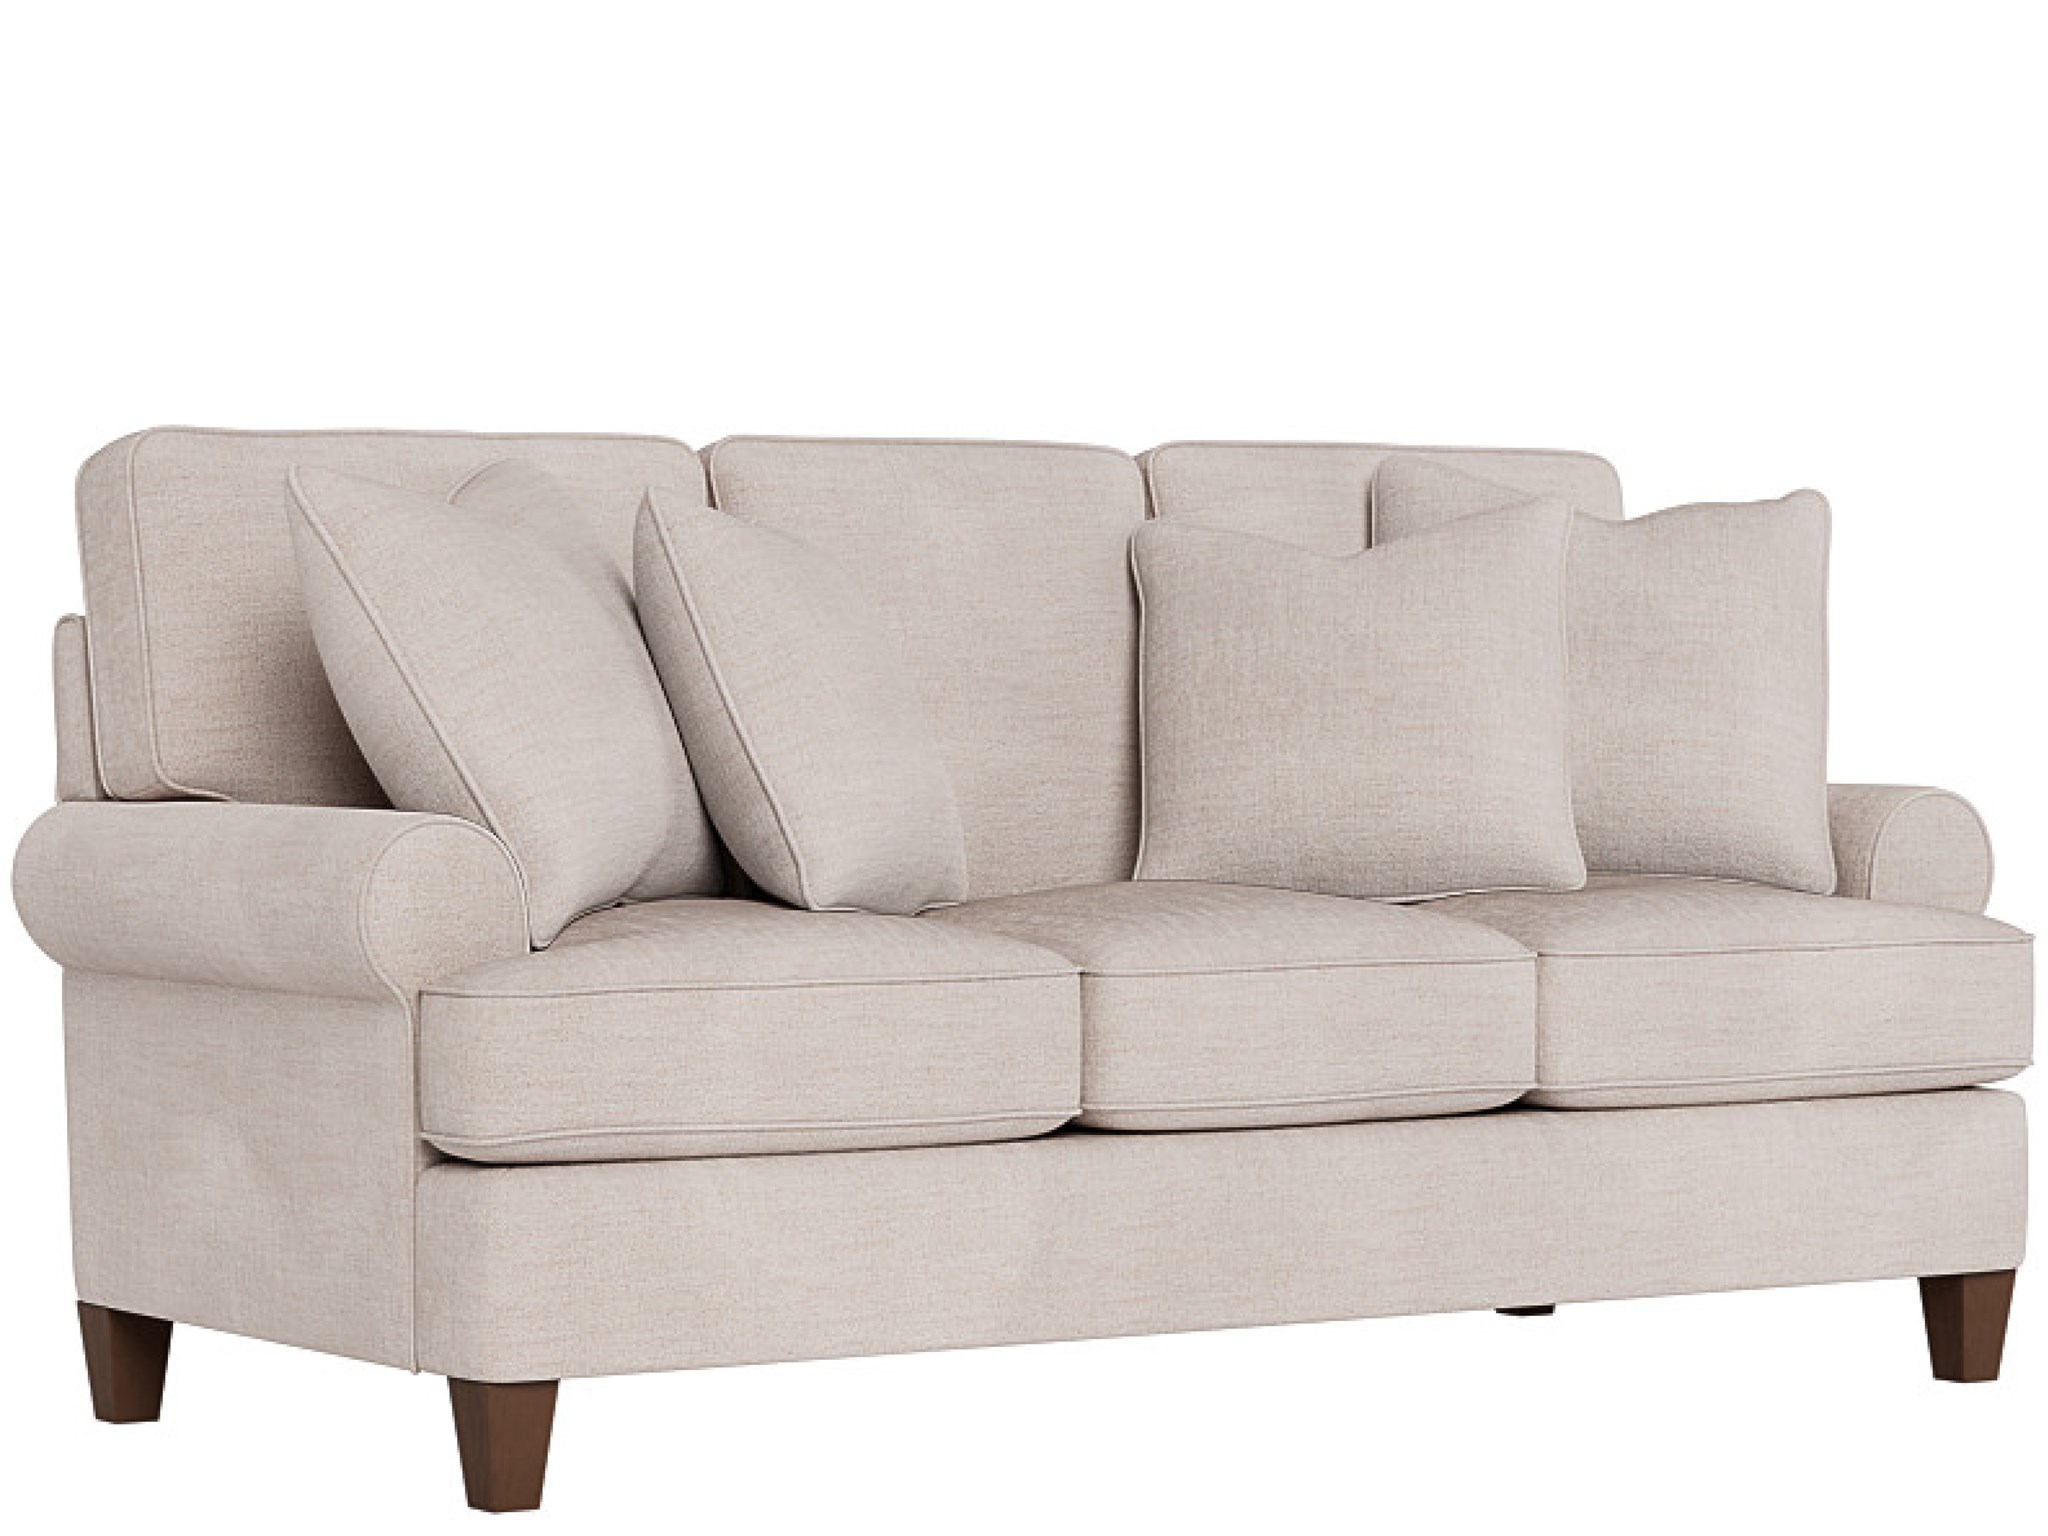 Blakely Sofa - Special Order